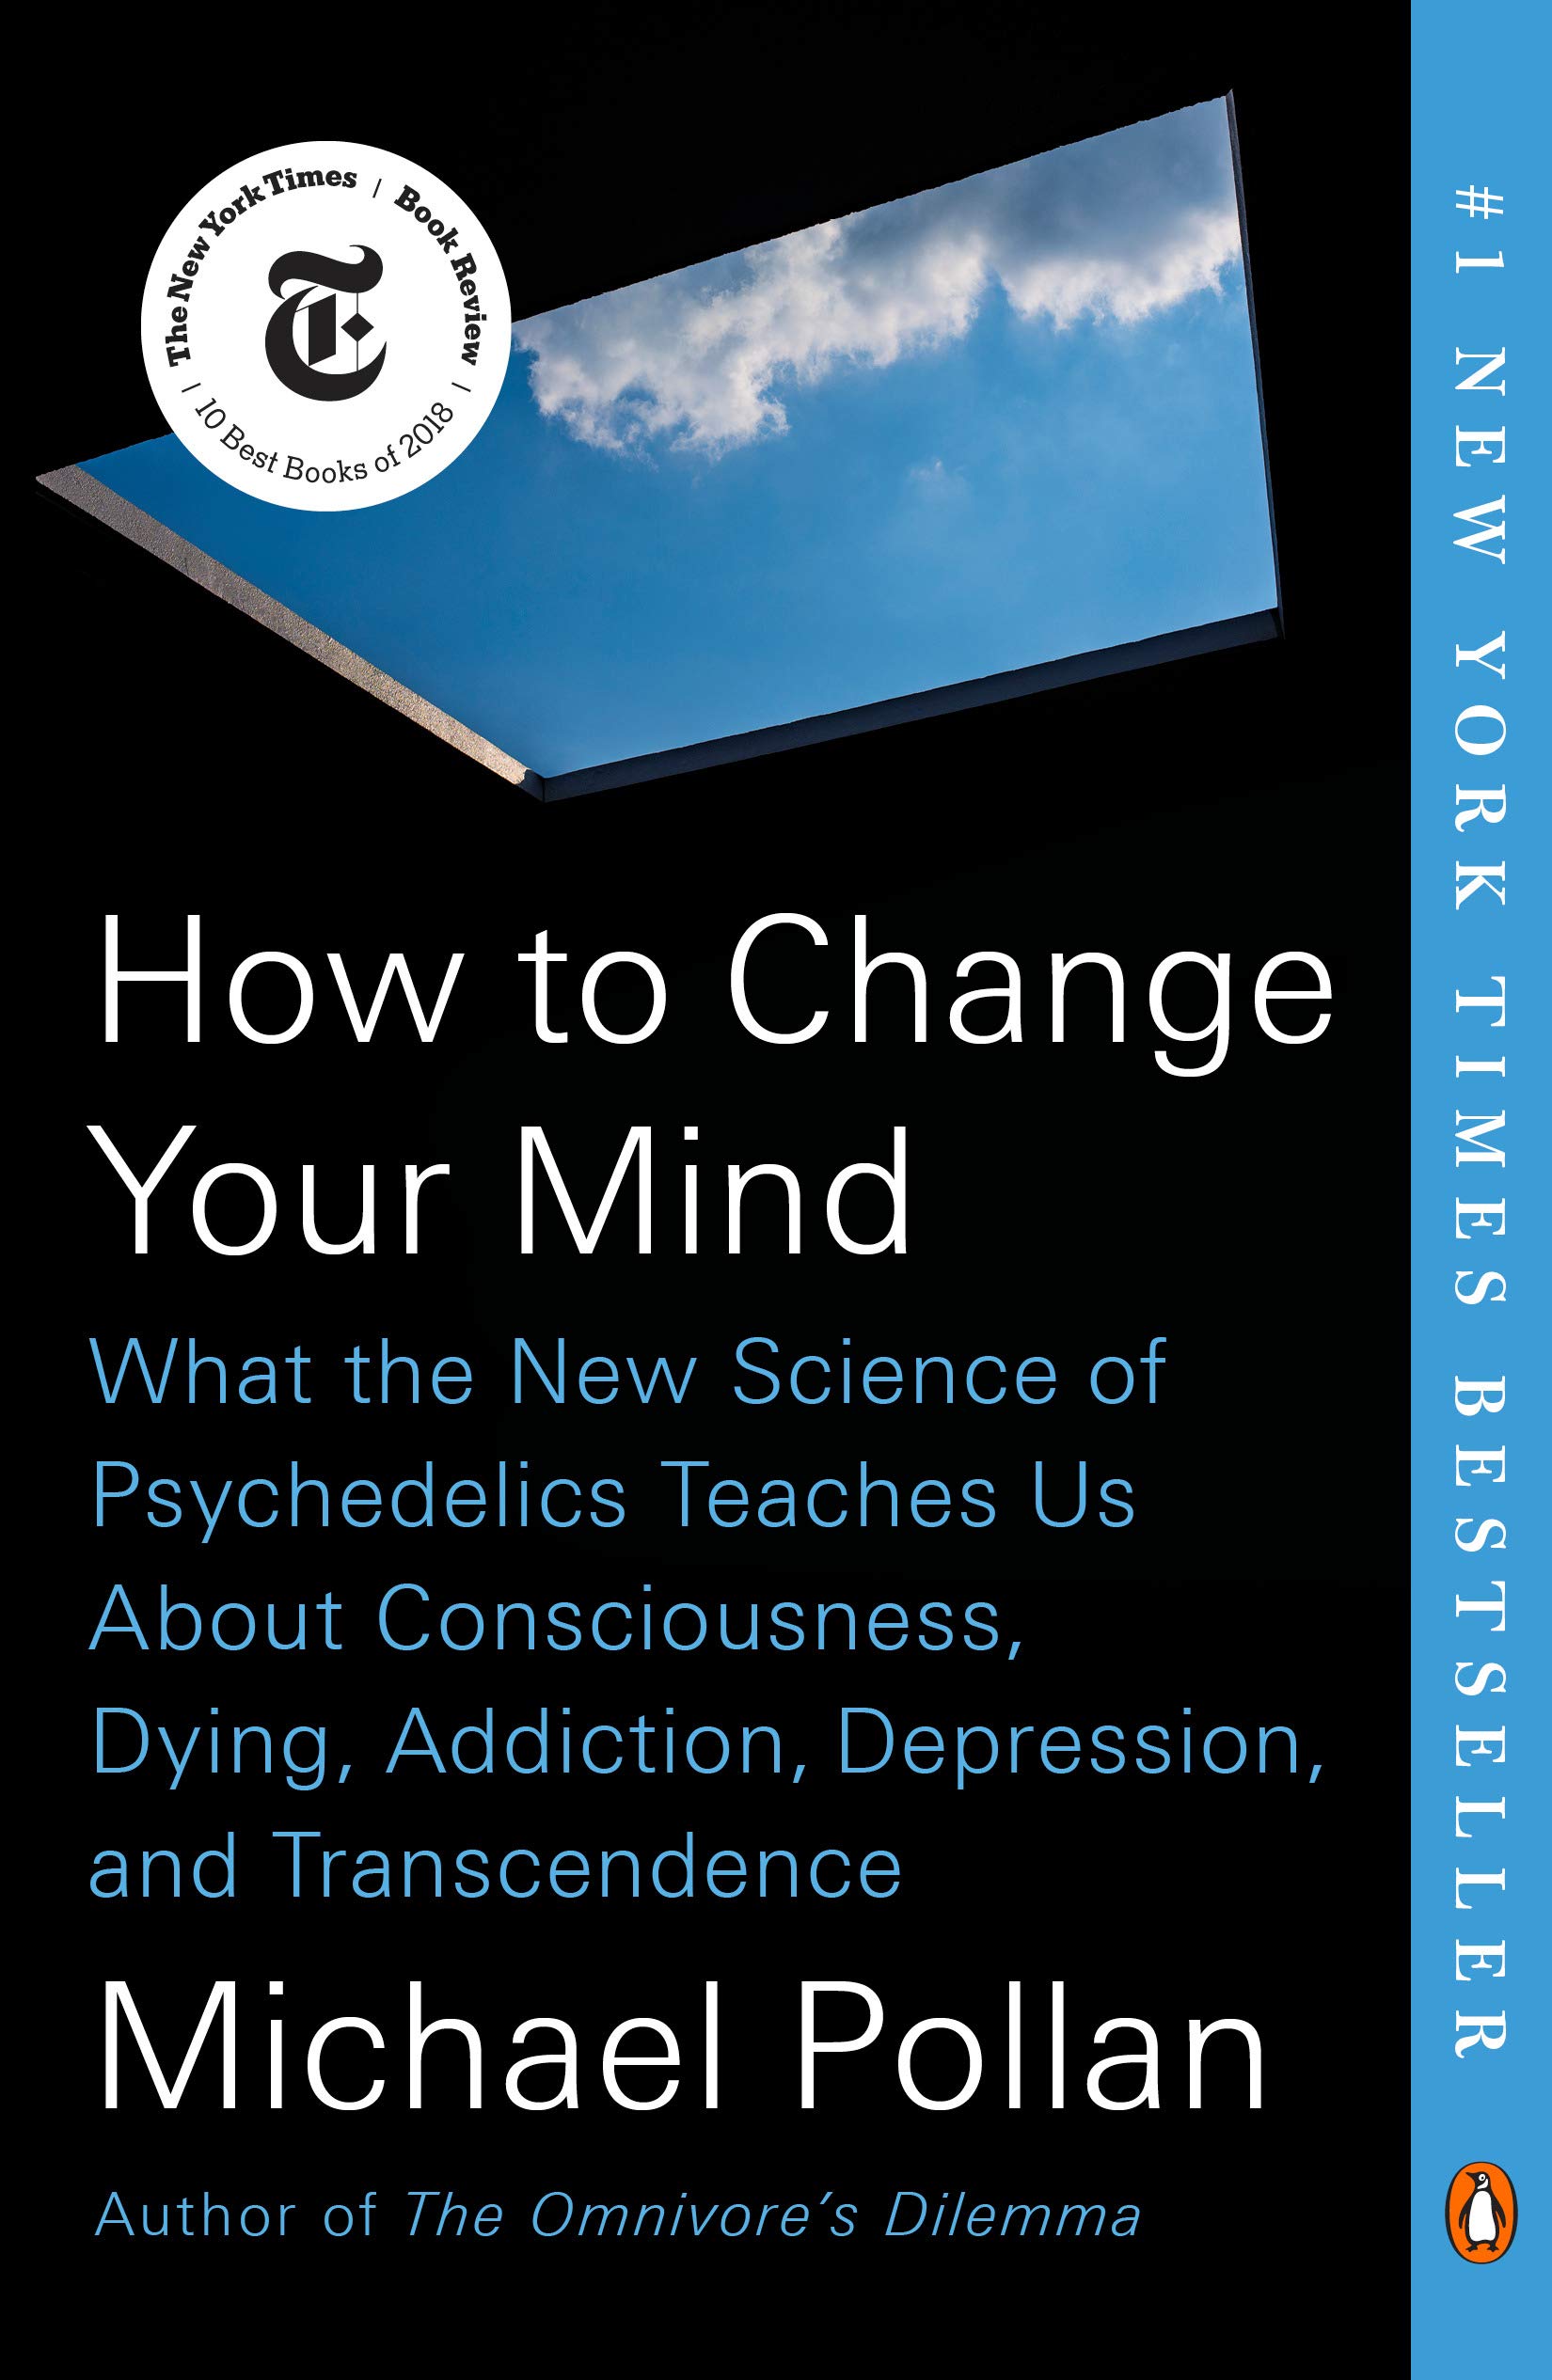 Cover for "How to Change Your Mind: What the New Science of Psychedelics Teaches Us About Consciousness, Dying, Addiction, Depression, and Transcendence" by Michael Pollan" by J. A. Jance